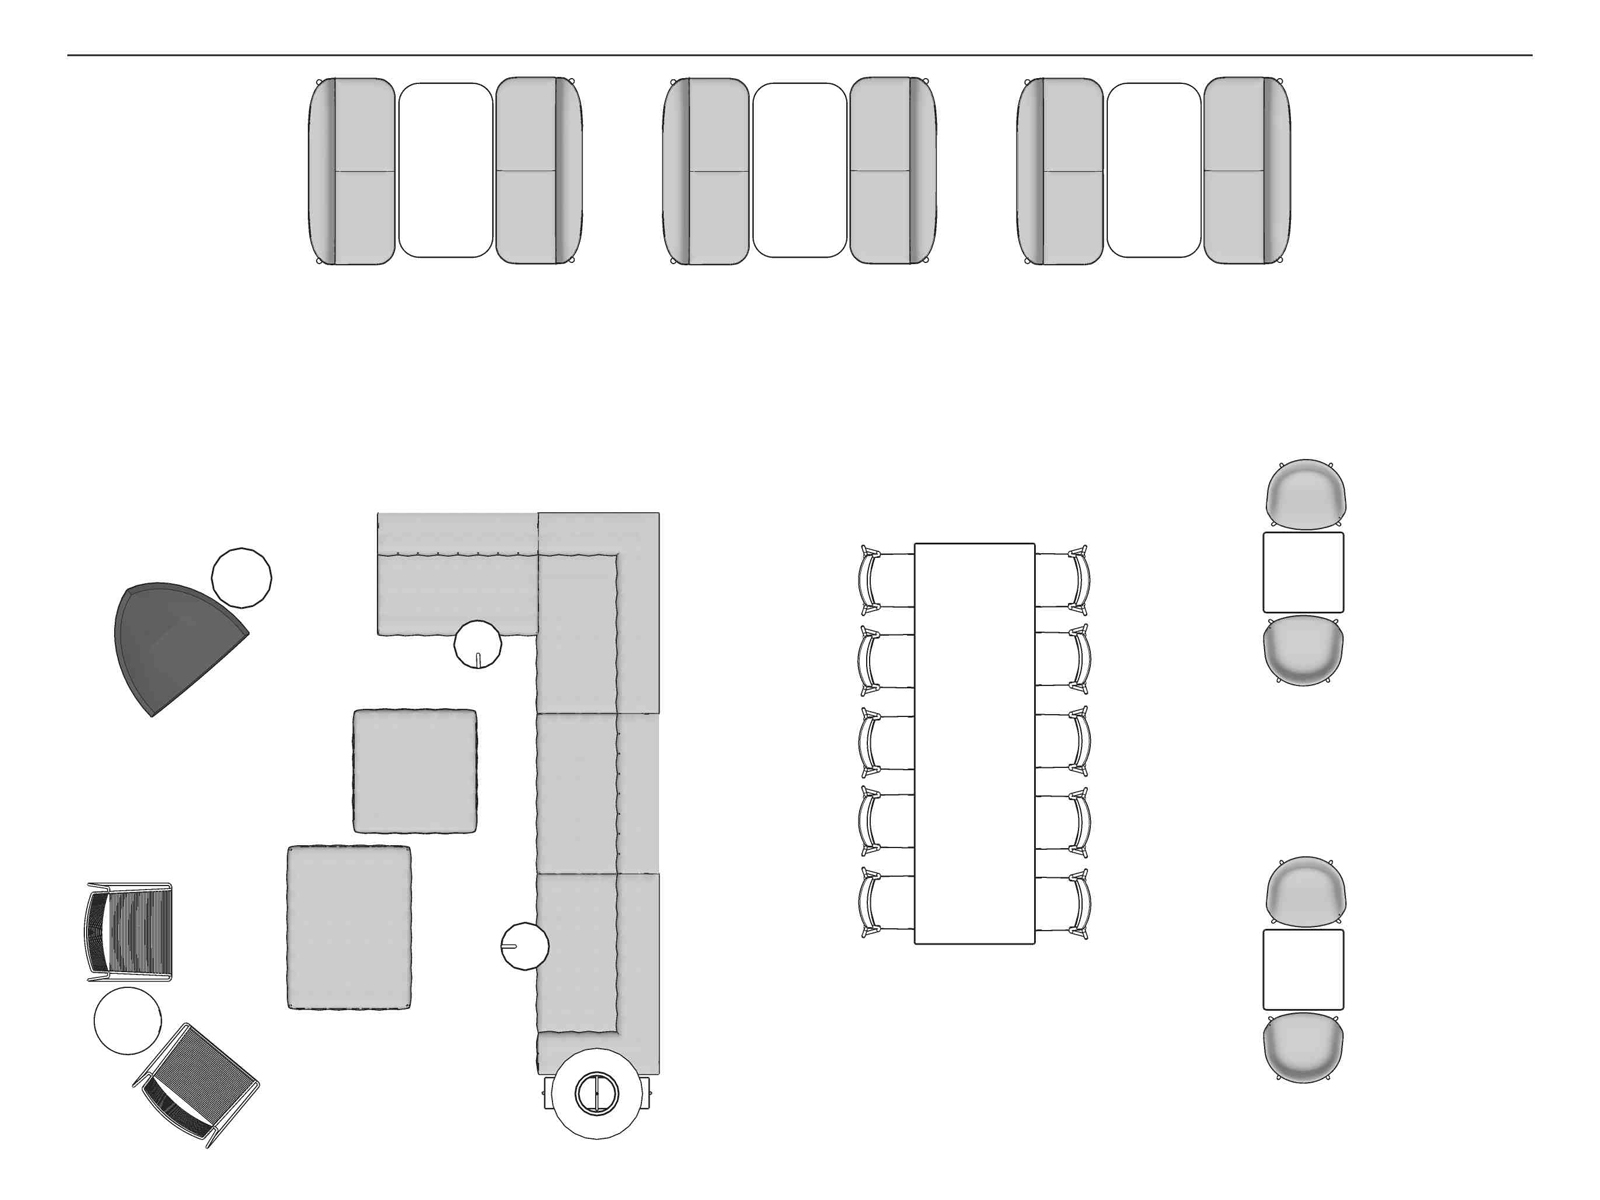 A line drawing viewed from above - Plaza 037